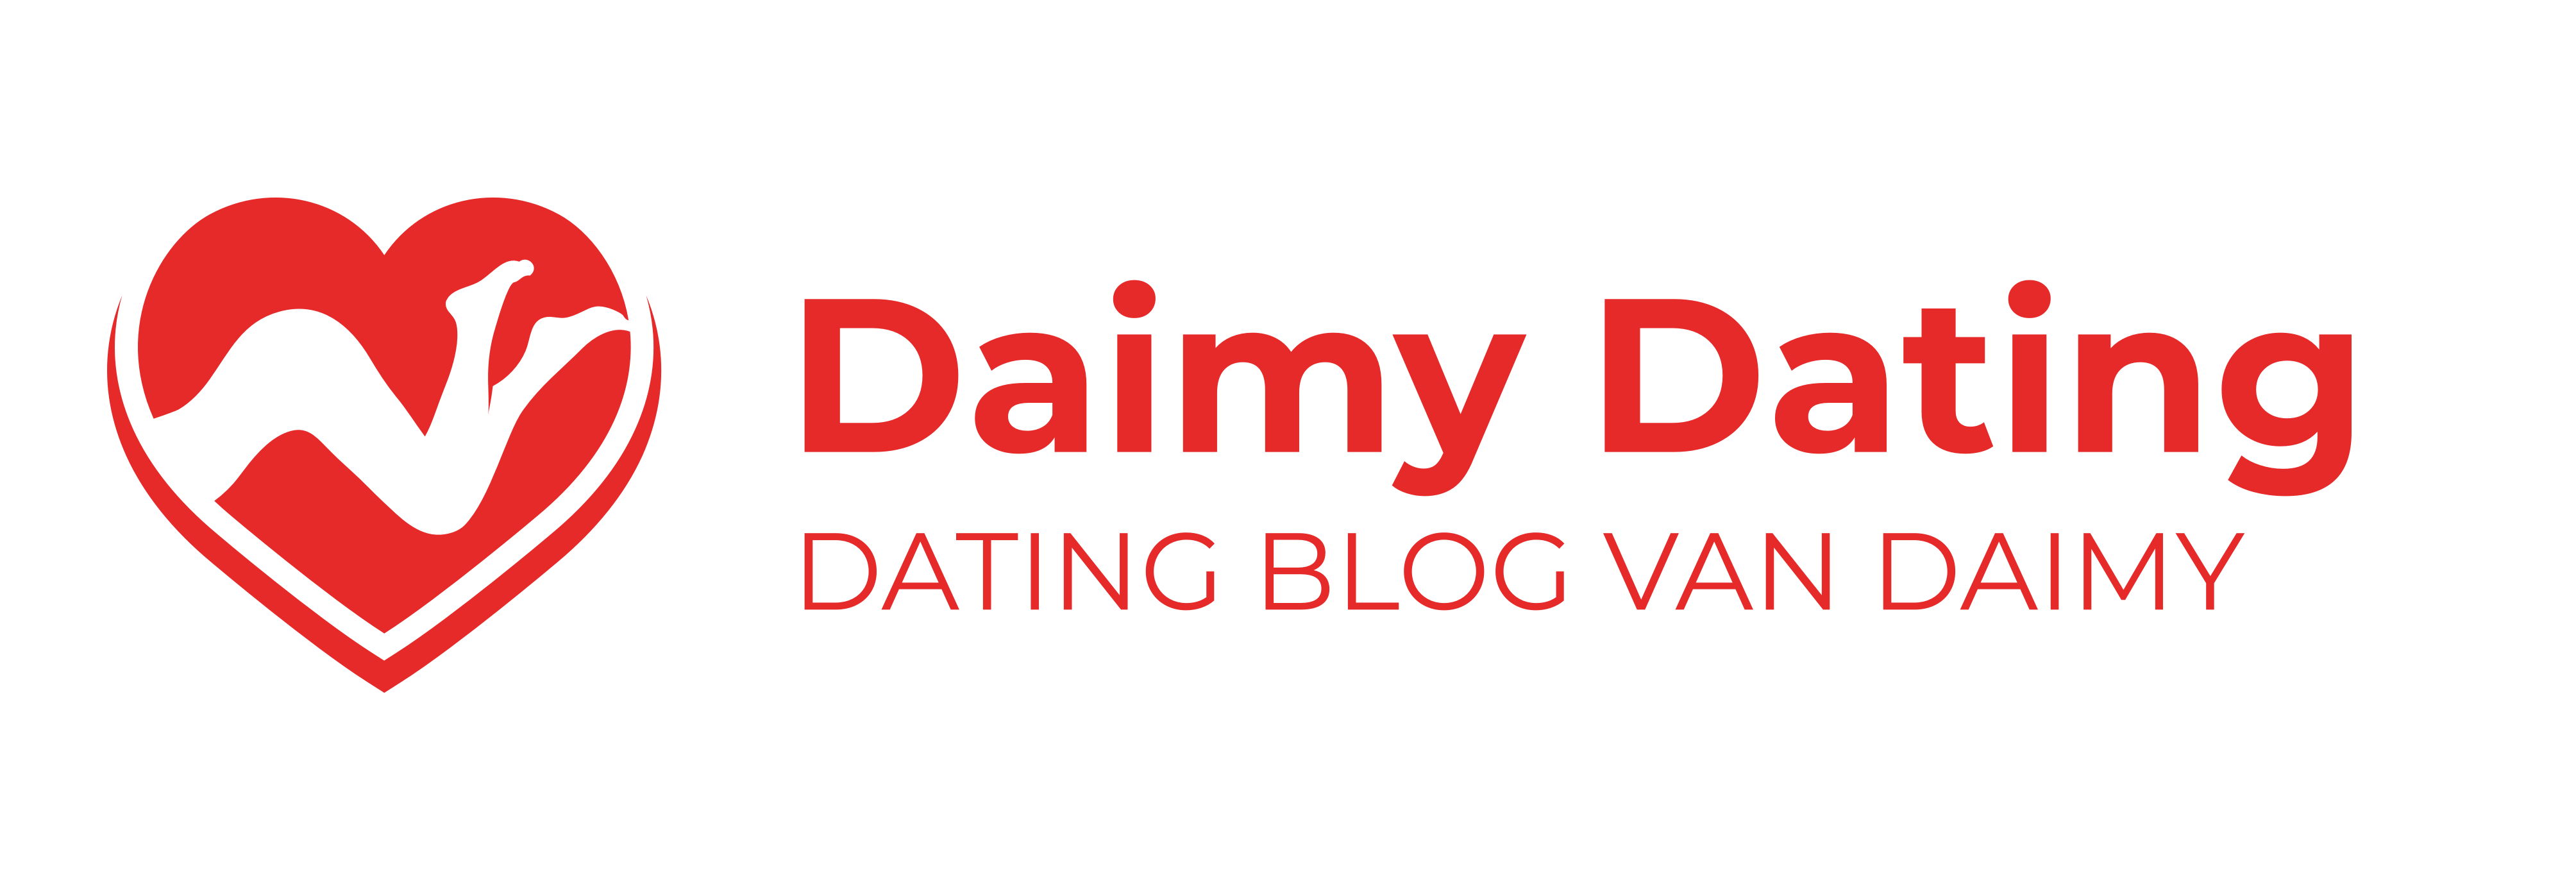 Daimy dating